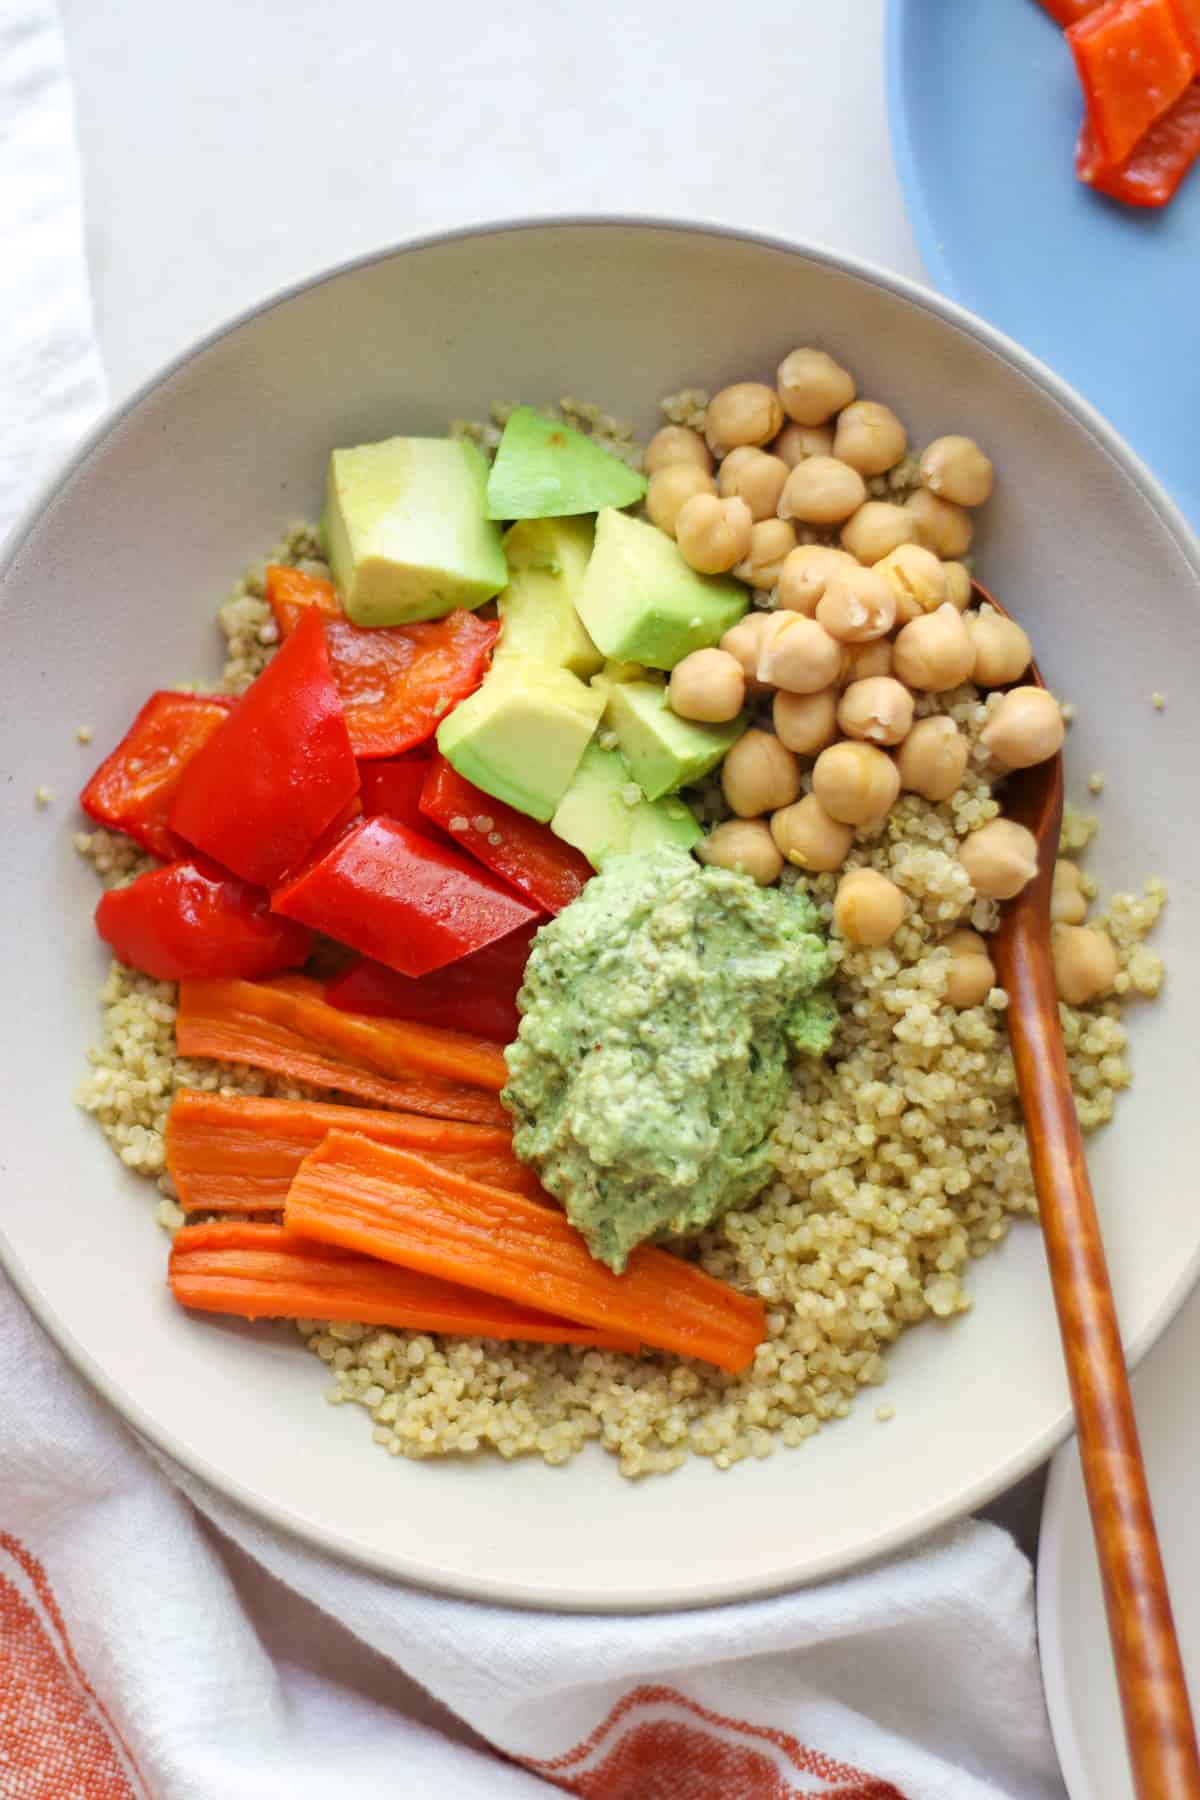 Quinoa bowl with carrots, bell peppers, ricotta pesto, avocado, and chickpeas.